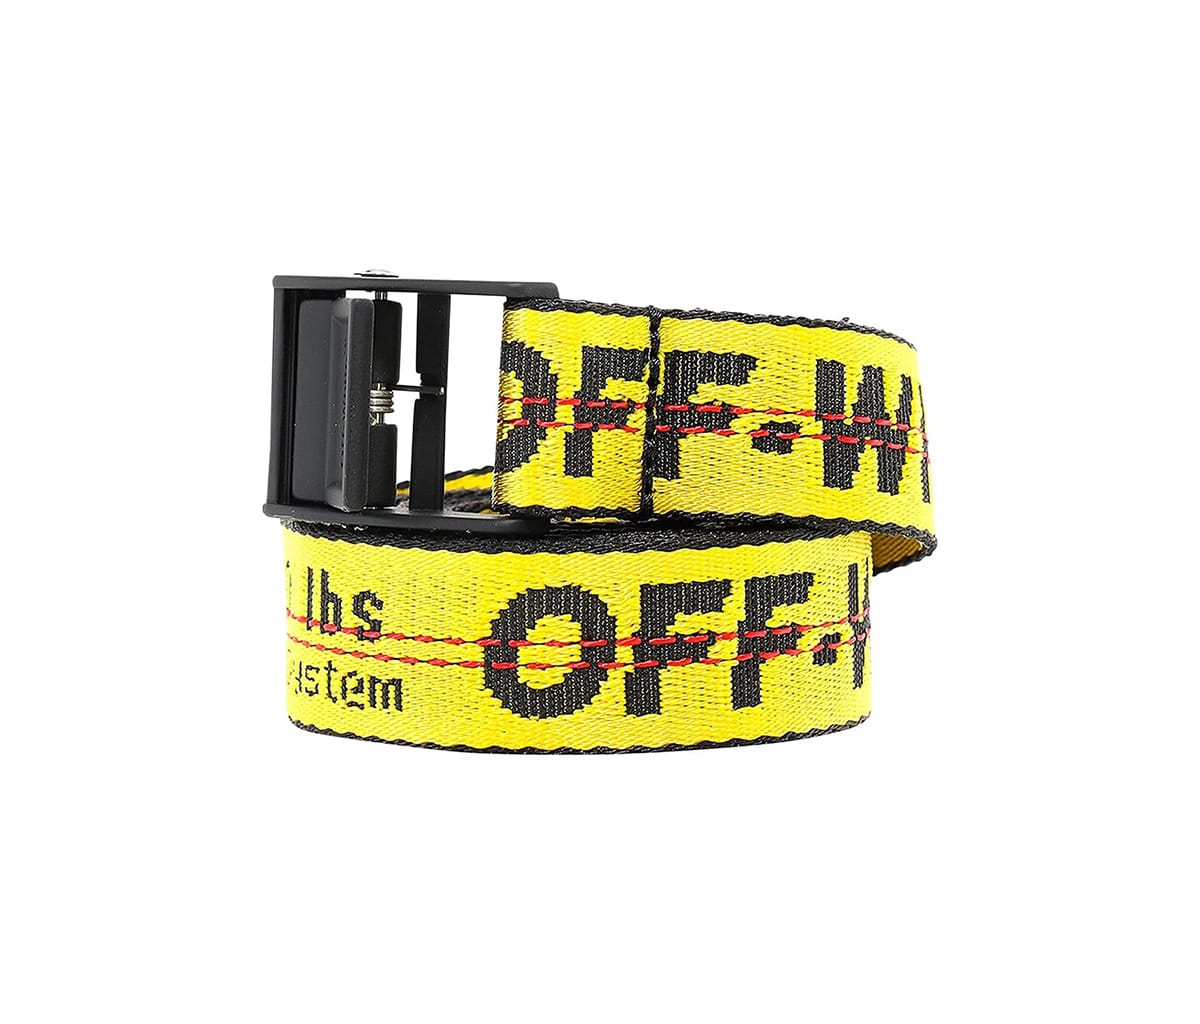 Mini Industrial belt in yellow - Off White